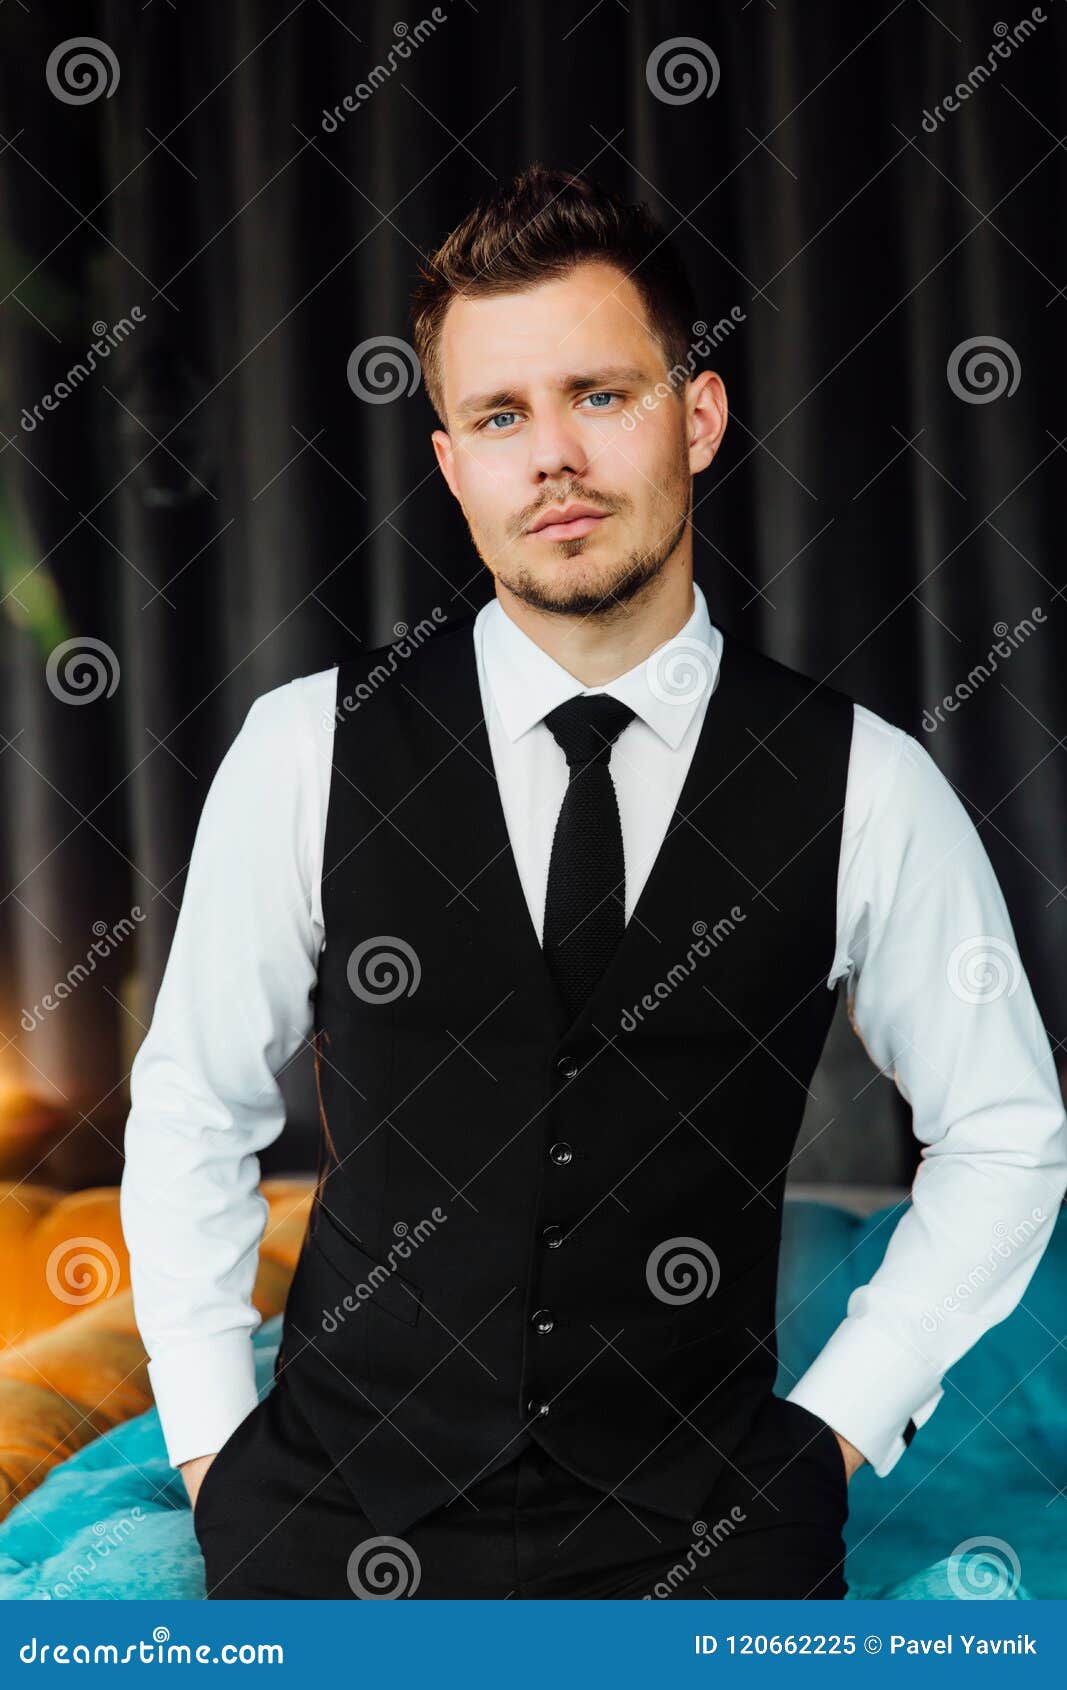 Stylish Athletic Man in a Business Costume Vest. Sits in the Turquoise ...